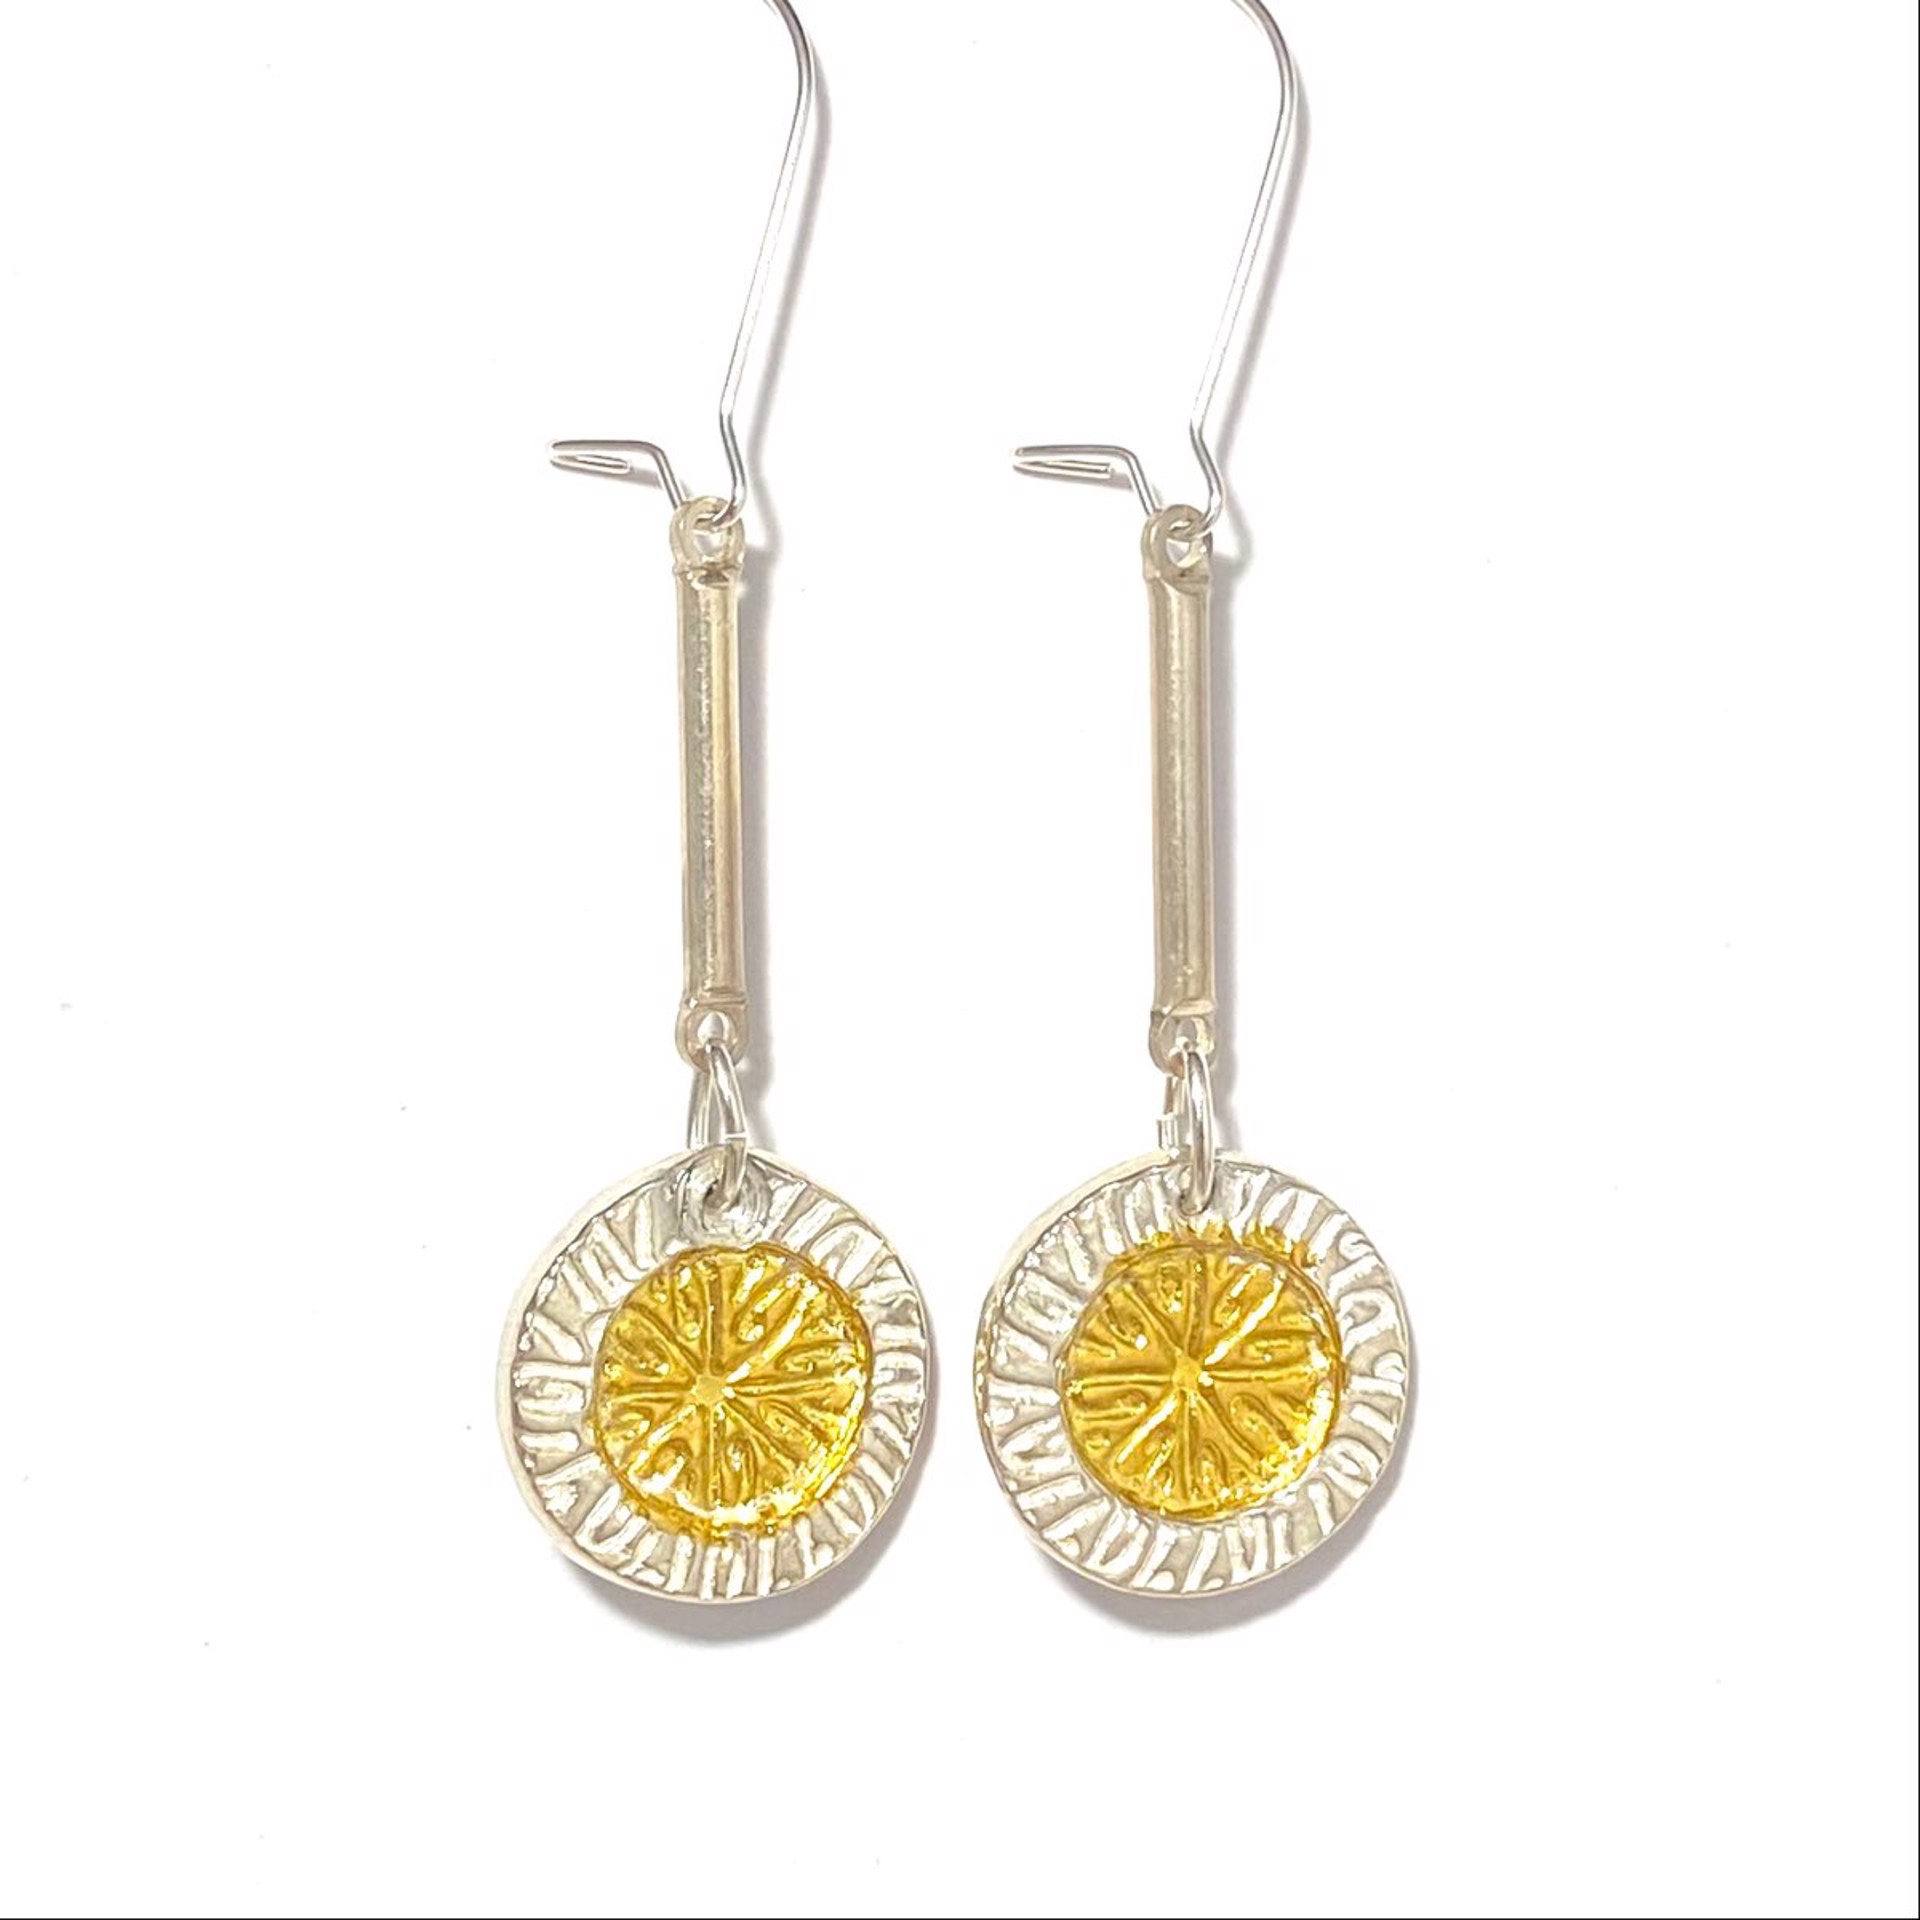 KH22-61 Keum-boo Fine Silver and Gold Circle Sterling Bar Drop Earrings by Karen Hakim